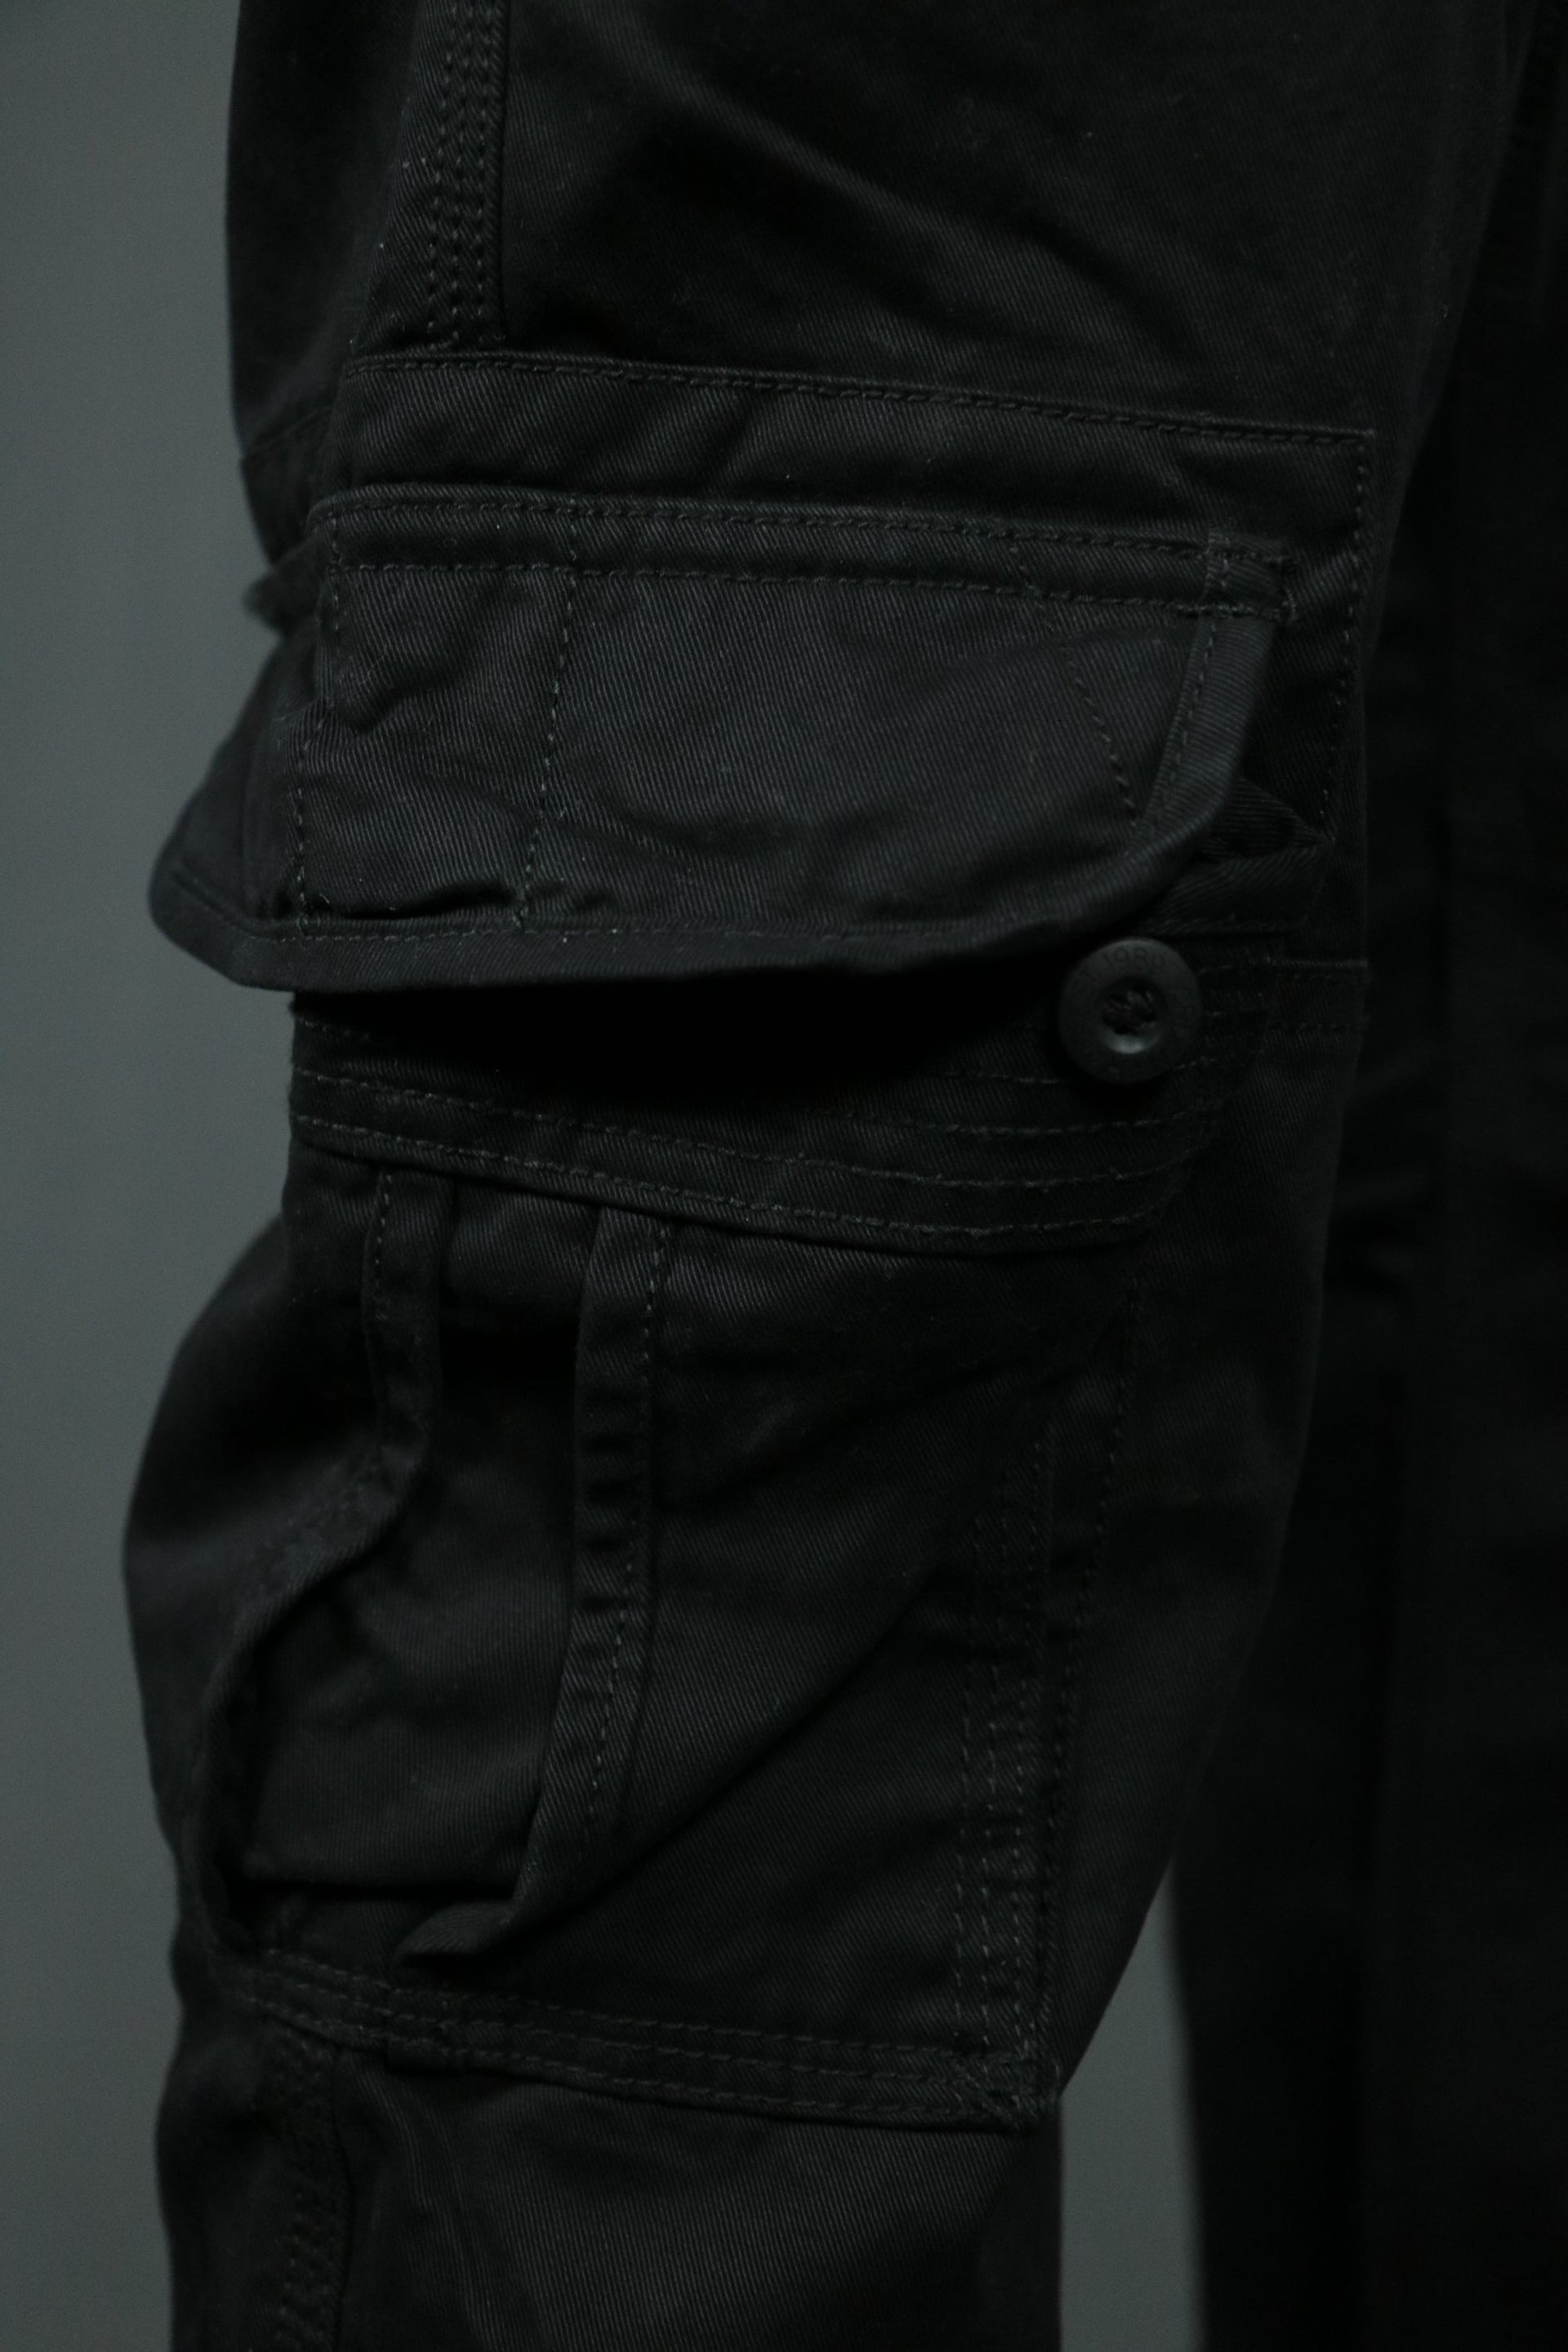 One of the two buttoned pockets of the black Jordan Craig cargo pants for men.